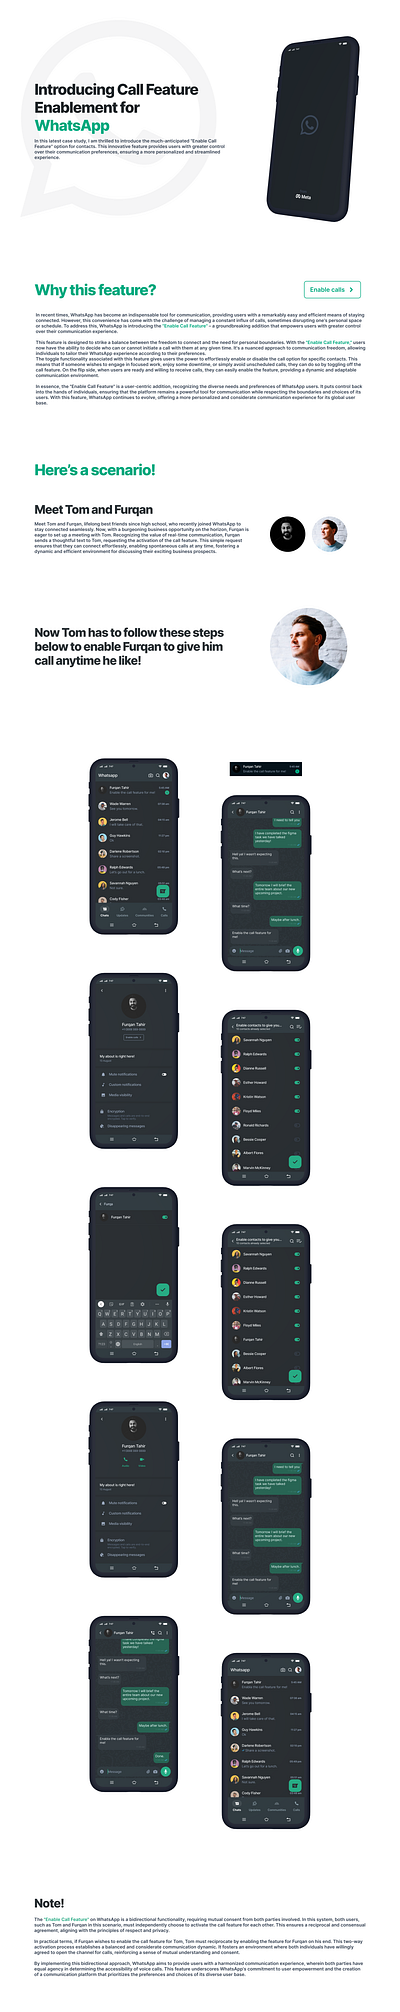 Case Study for WhatsApp Call Feature android branding call features mockups product design prototype ui user experience user interface ux whatsapp wireframes